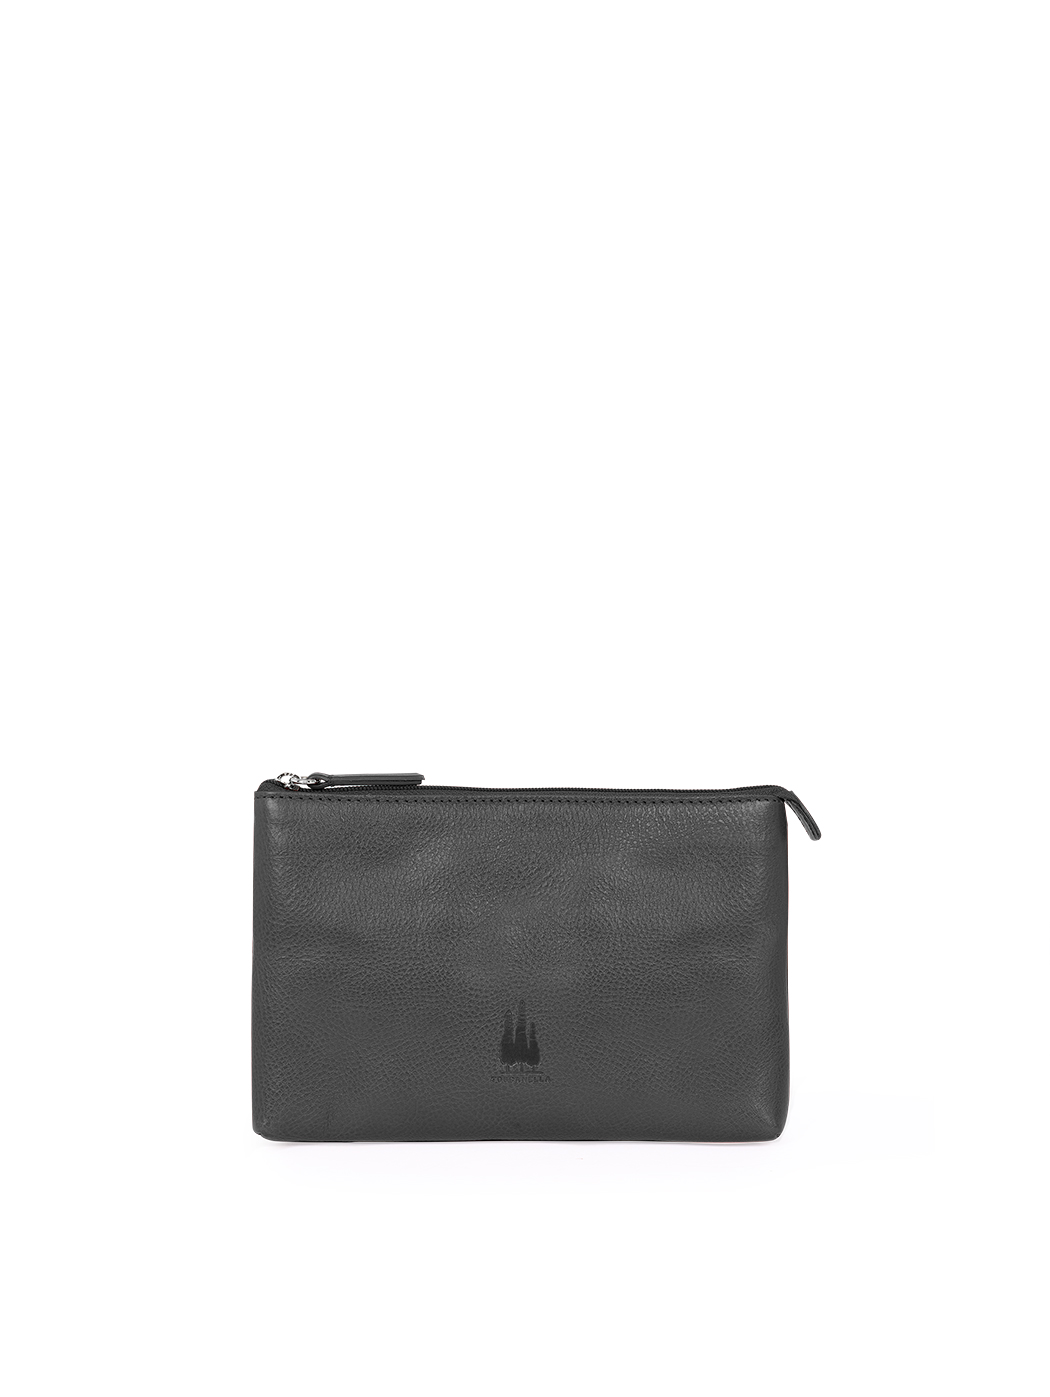 Small Travel Pouch in Leather Black